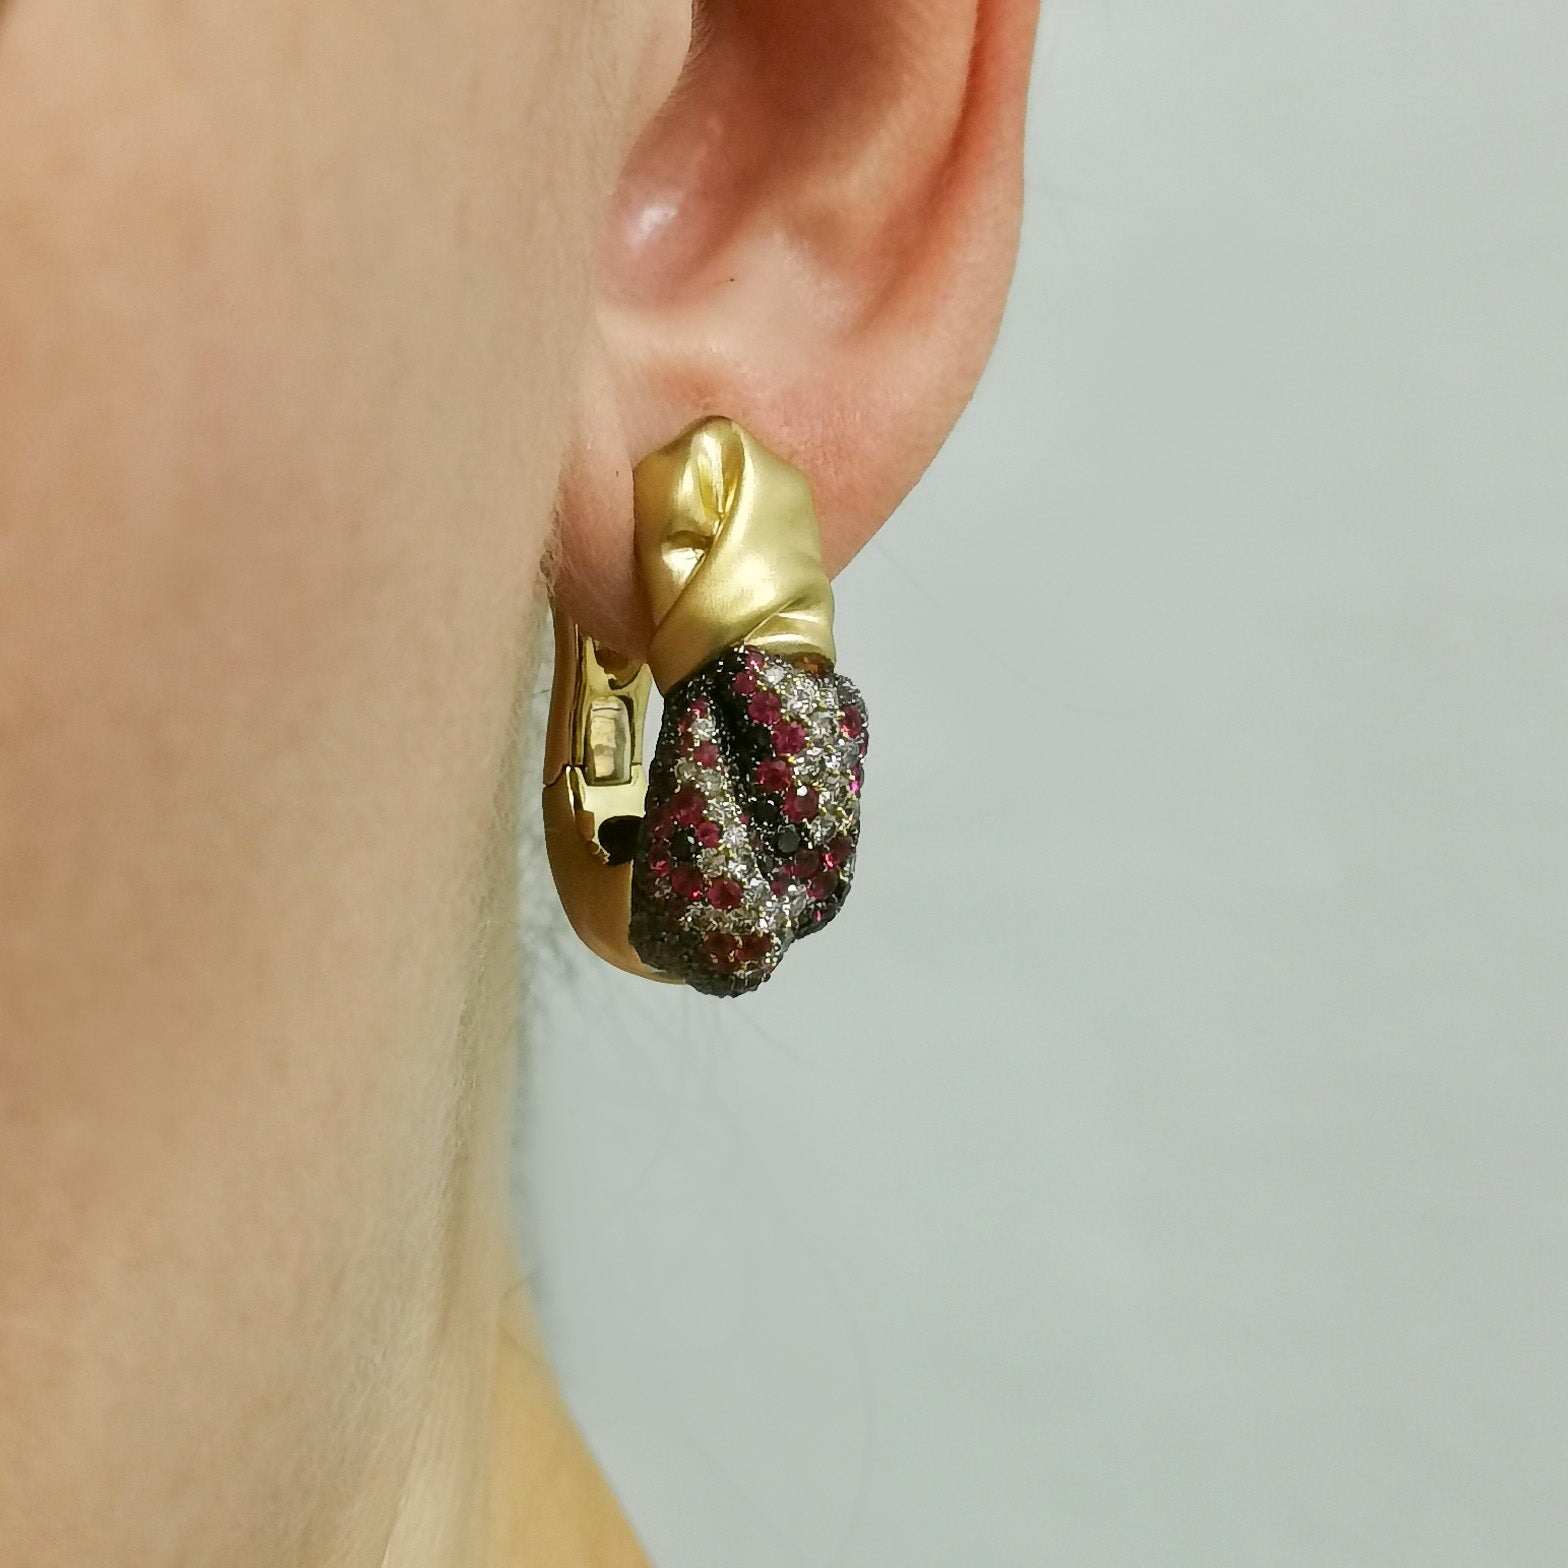 E 0132-5, 18K Yellow Gold, Ruby, Champagne and Black Diamonds Earrings